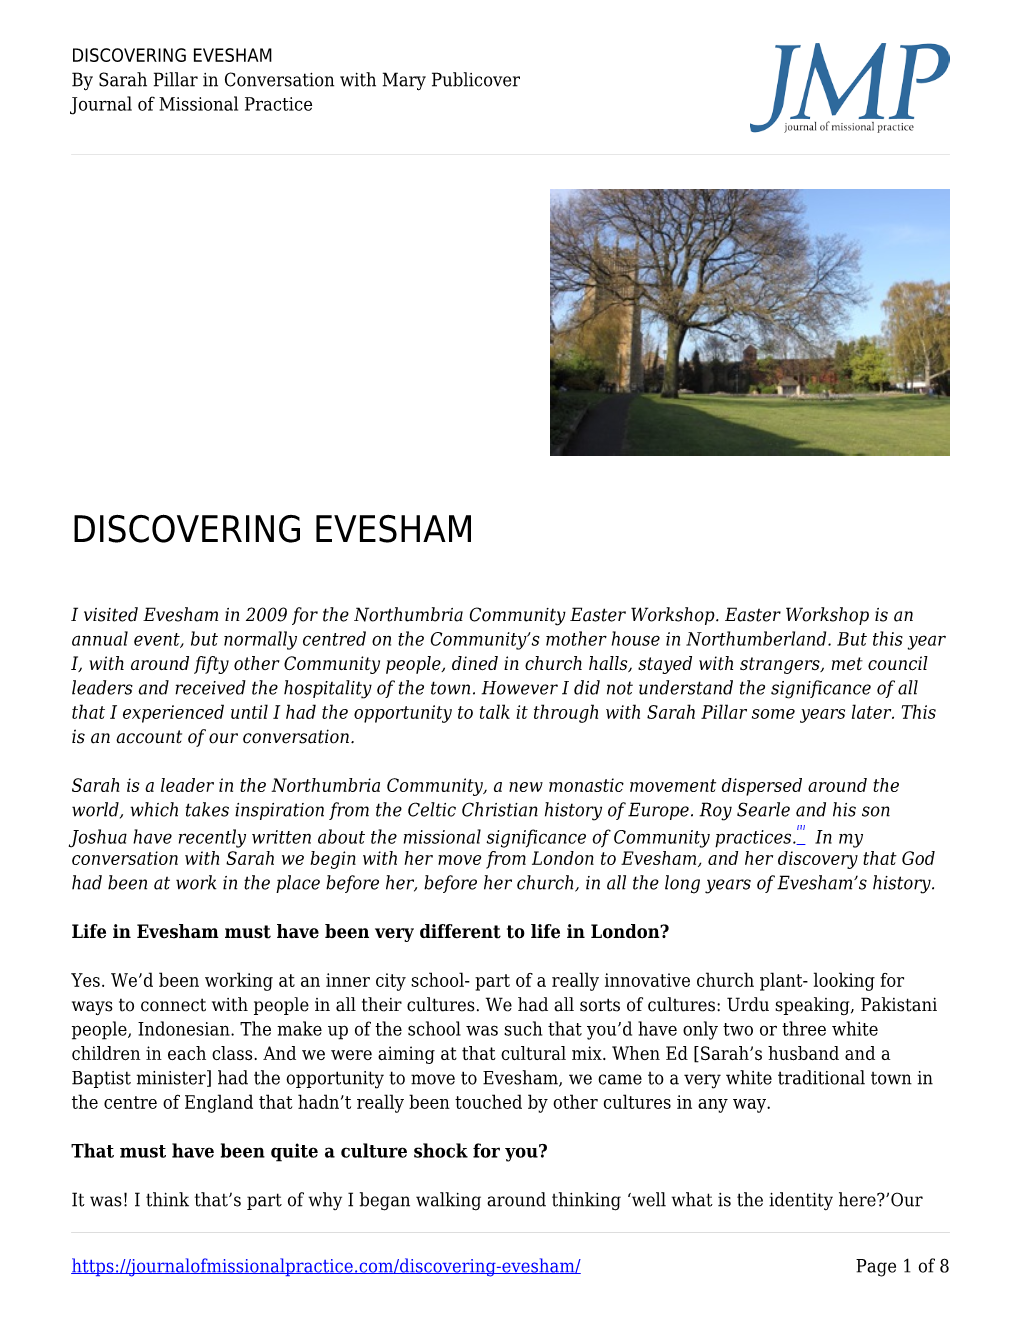 DISCOVERING EVESHAM by Sarah Pillar in Conversation with Mary Publicover Journal of Missional Practice